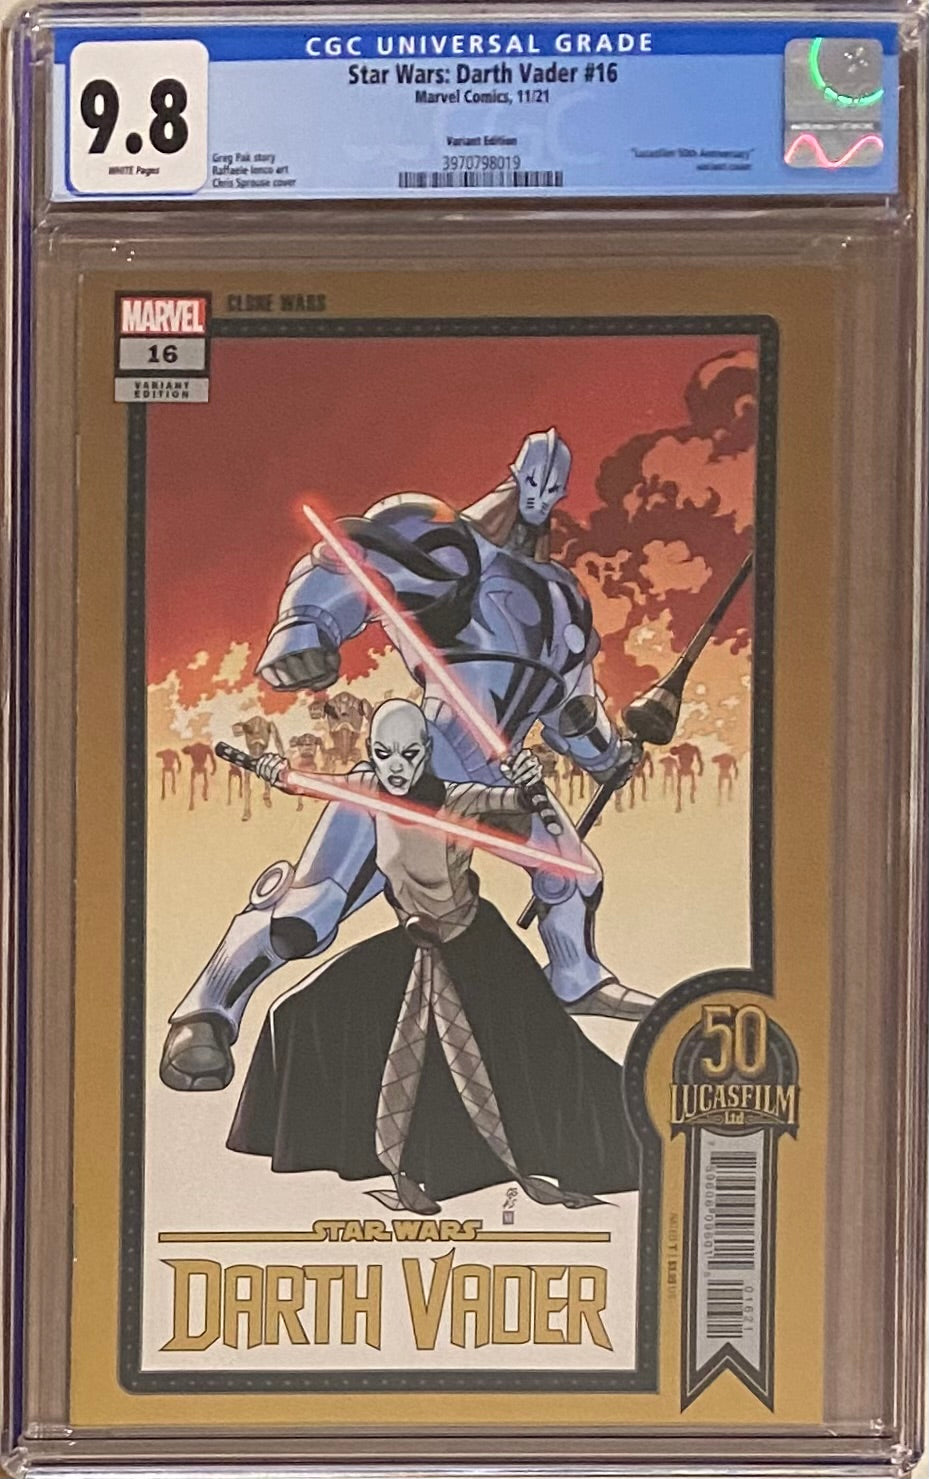 Star Wars: Darth Vader #16 Sprouse Variant CGC 9.8 - War of the Bounty Hunters